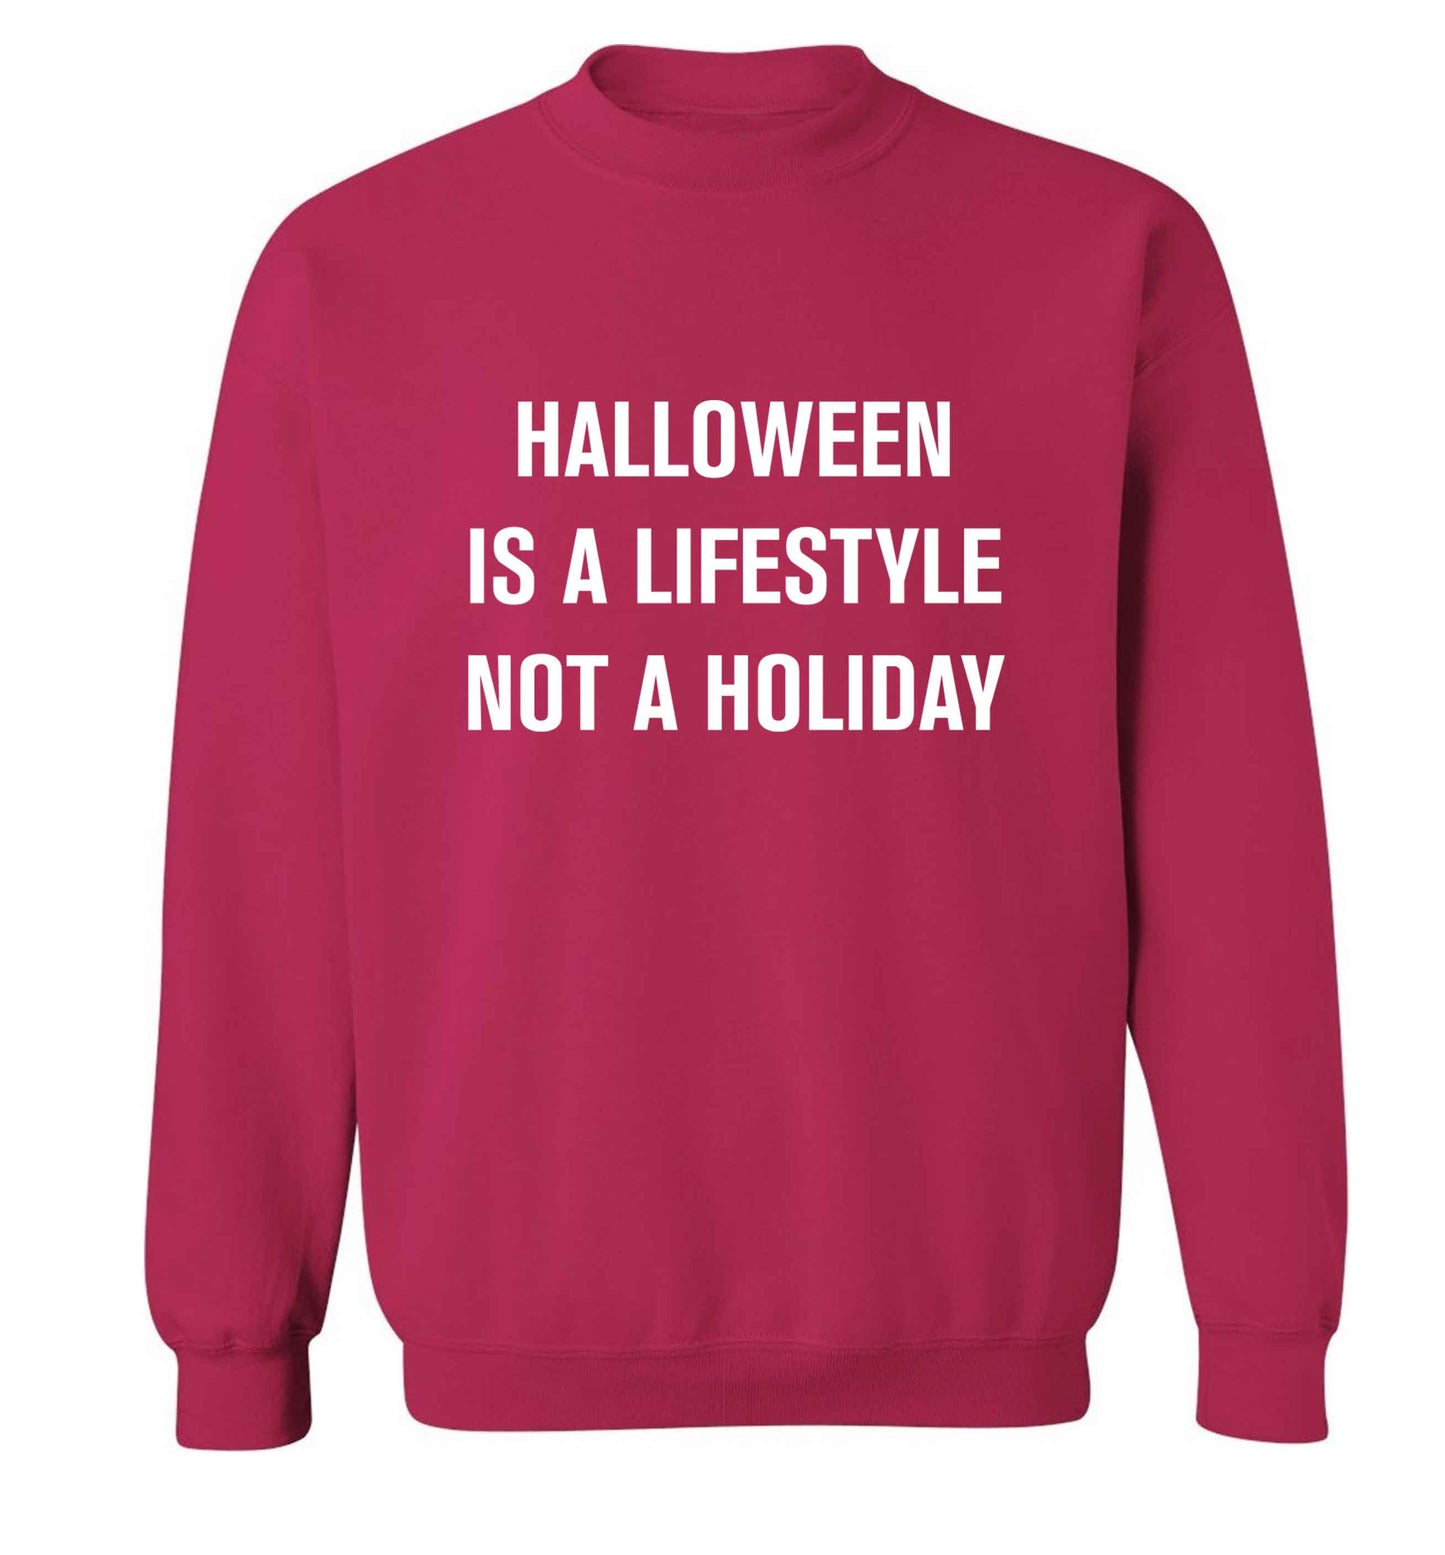 Halloween is a lifestyle not a holiday adult's unisex pink sweater 2XL